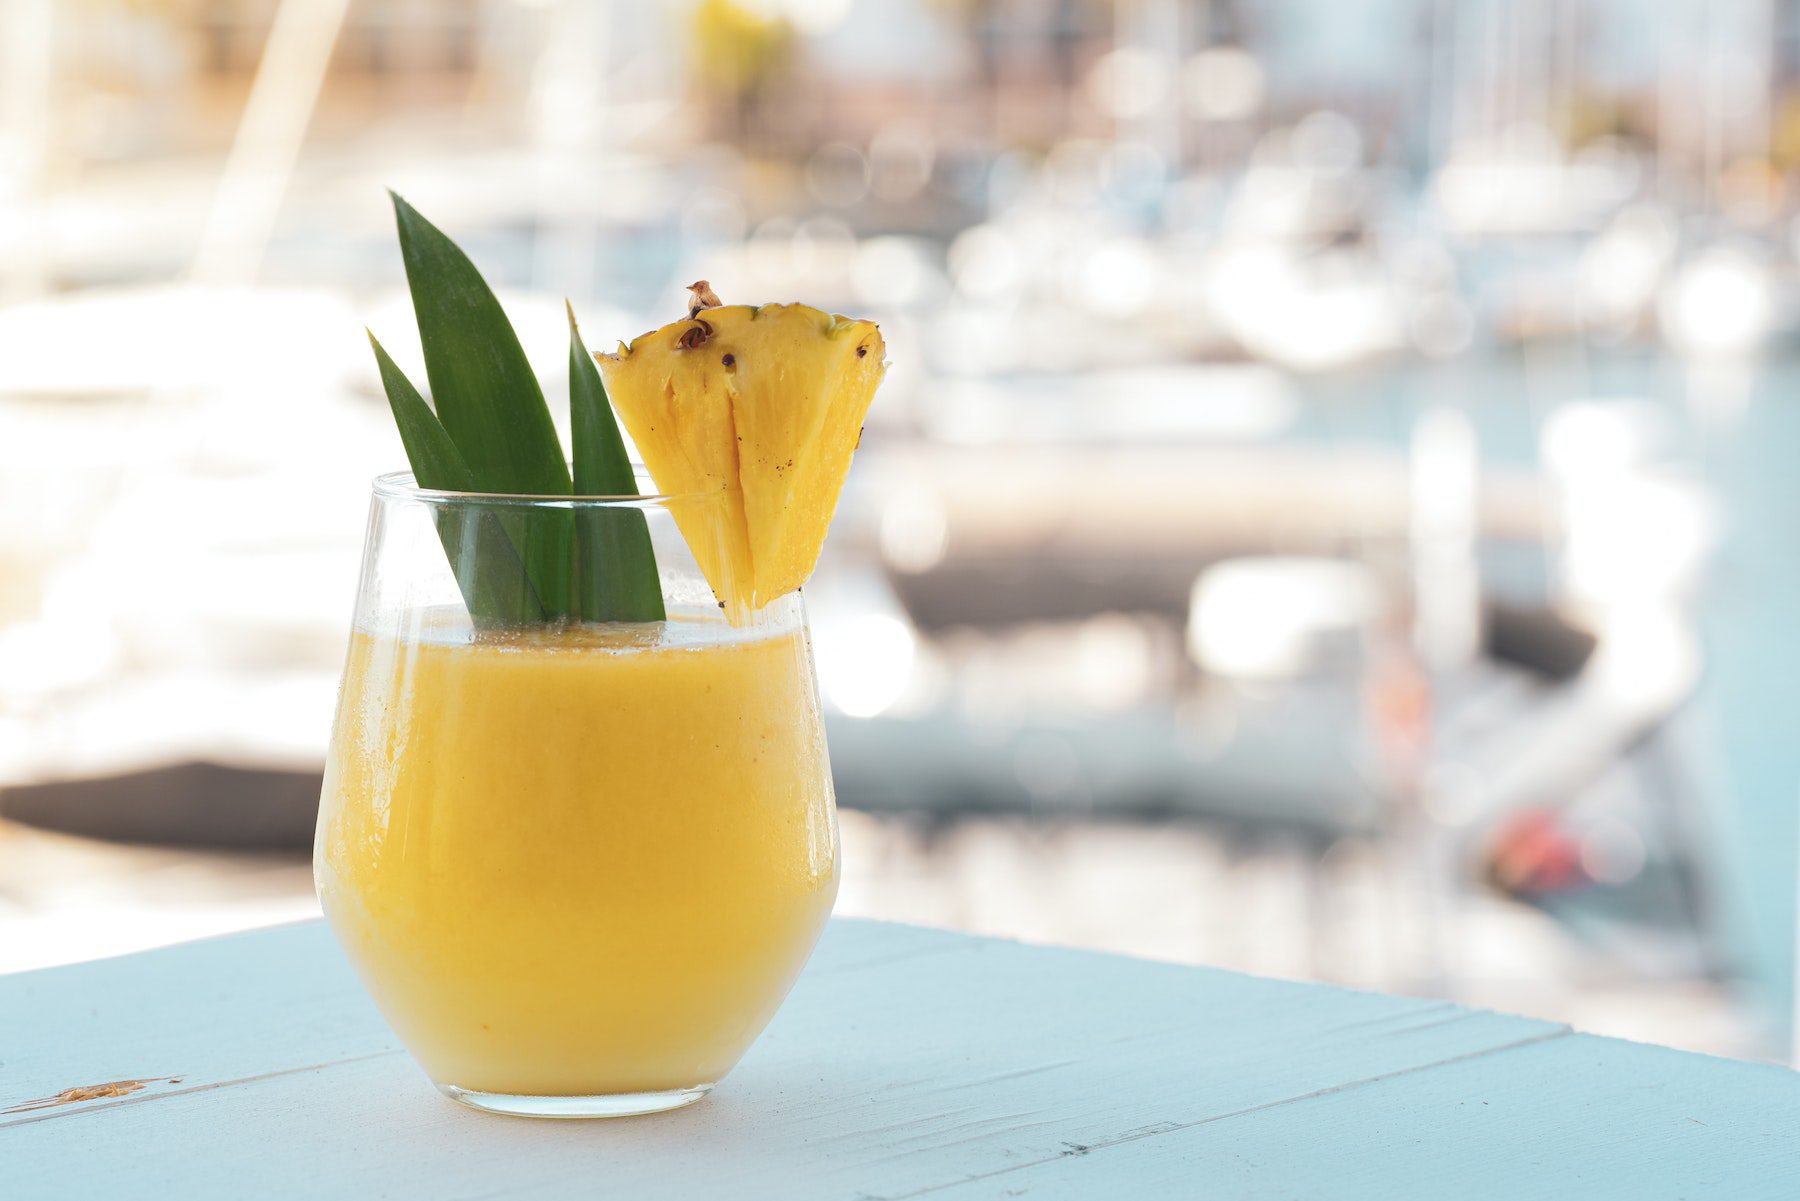 A yellow smoothie on a light blue tabletop, garnished with a pineapple slice and greenery.